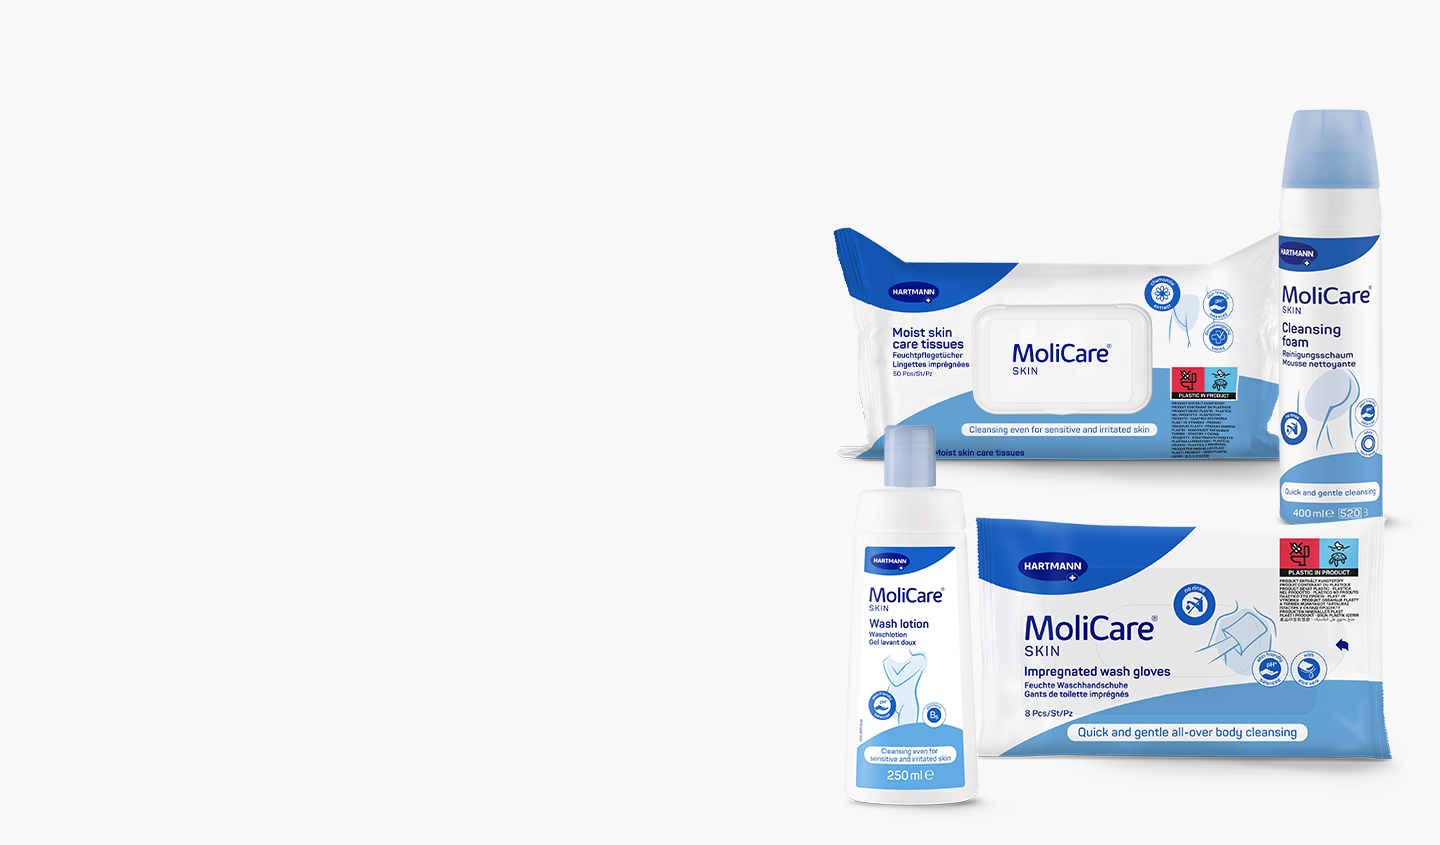 Cleanse the Skin with the MoliCare® Skin CLEAN Range